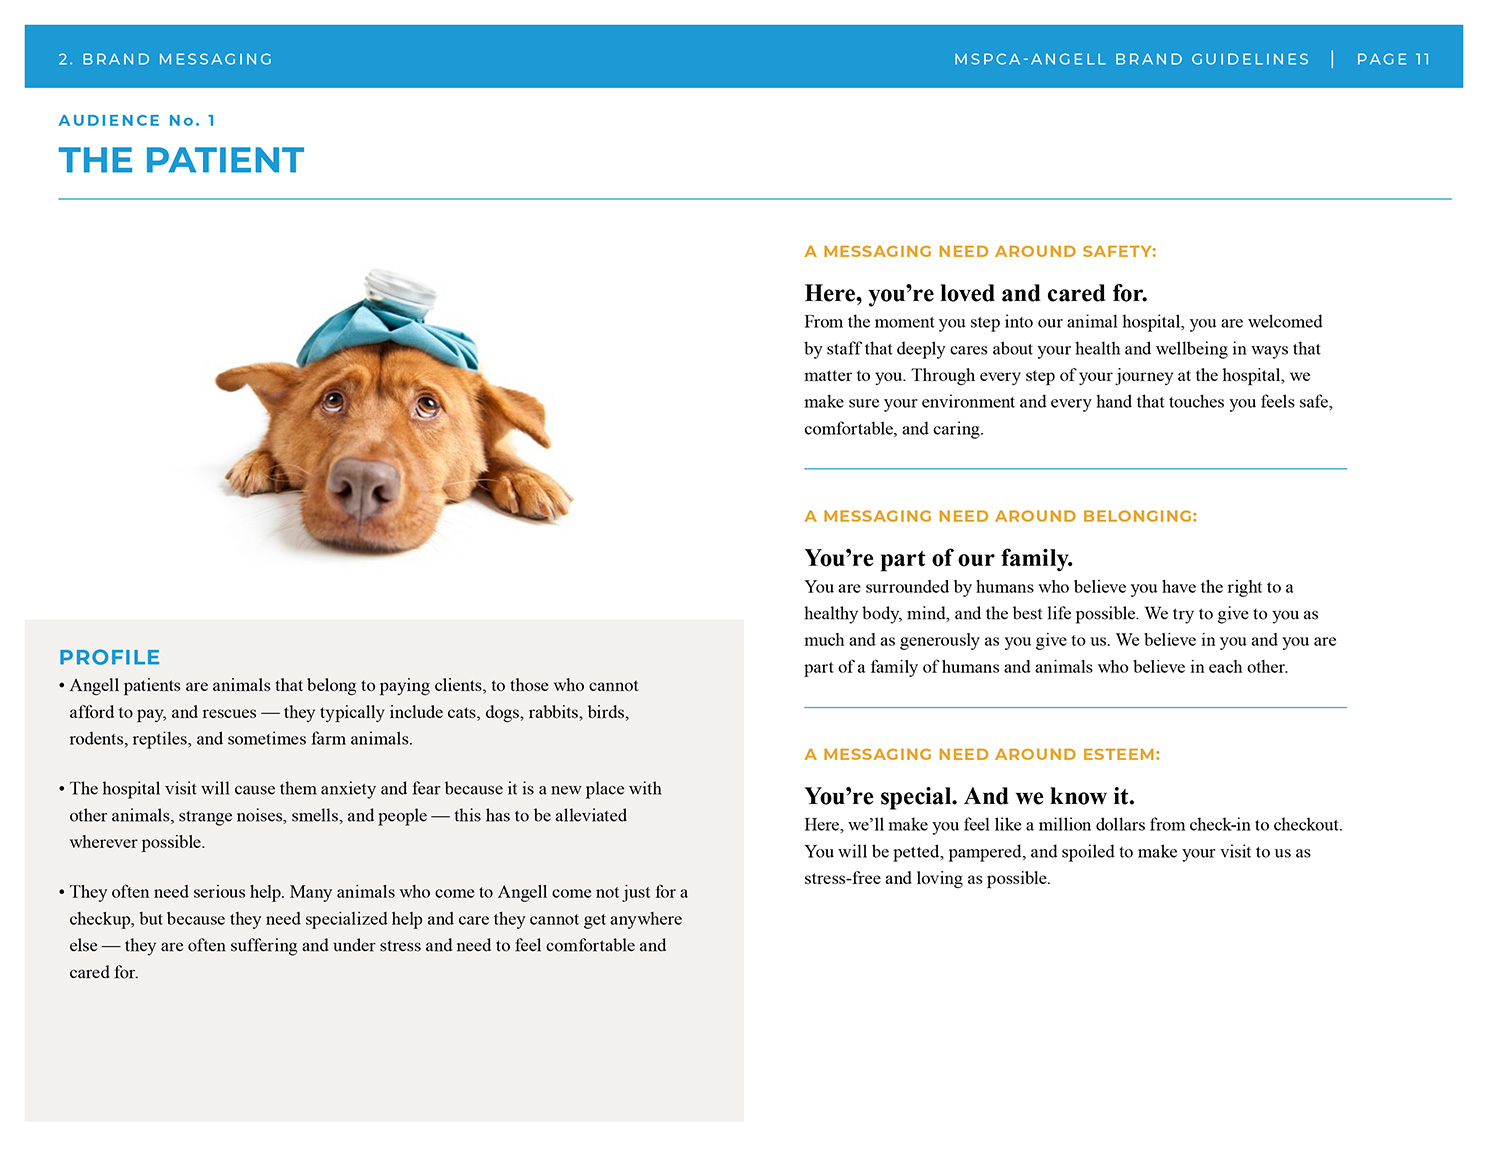 MSPCA-Angell brand guide patient overview of types of animals they treat